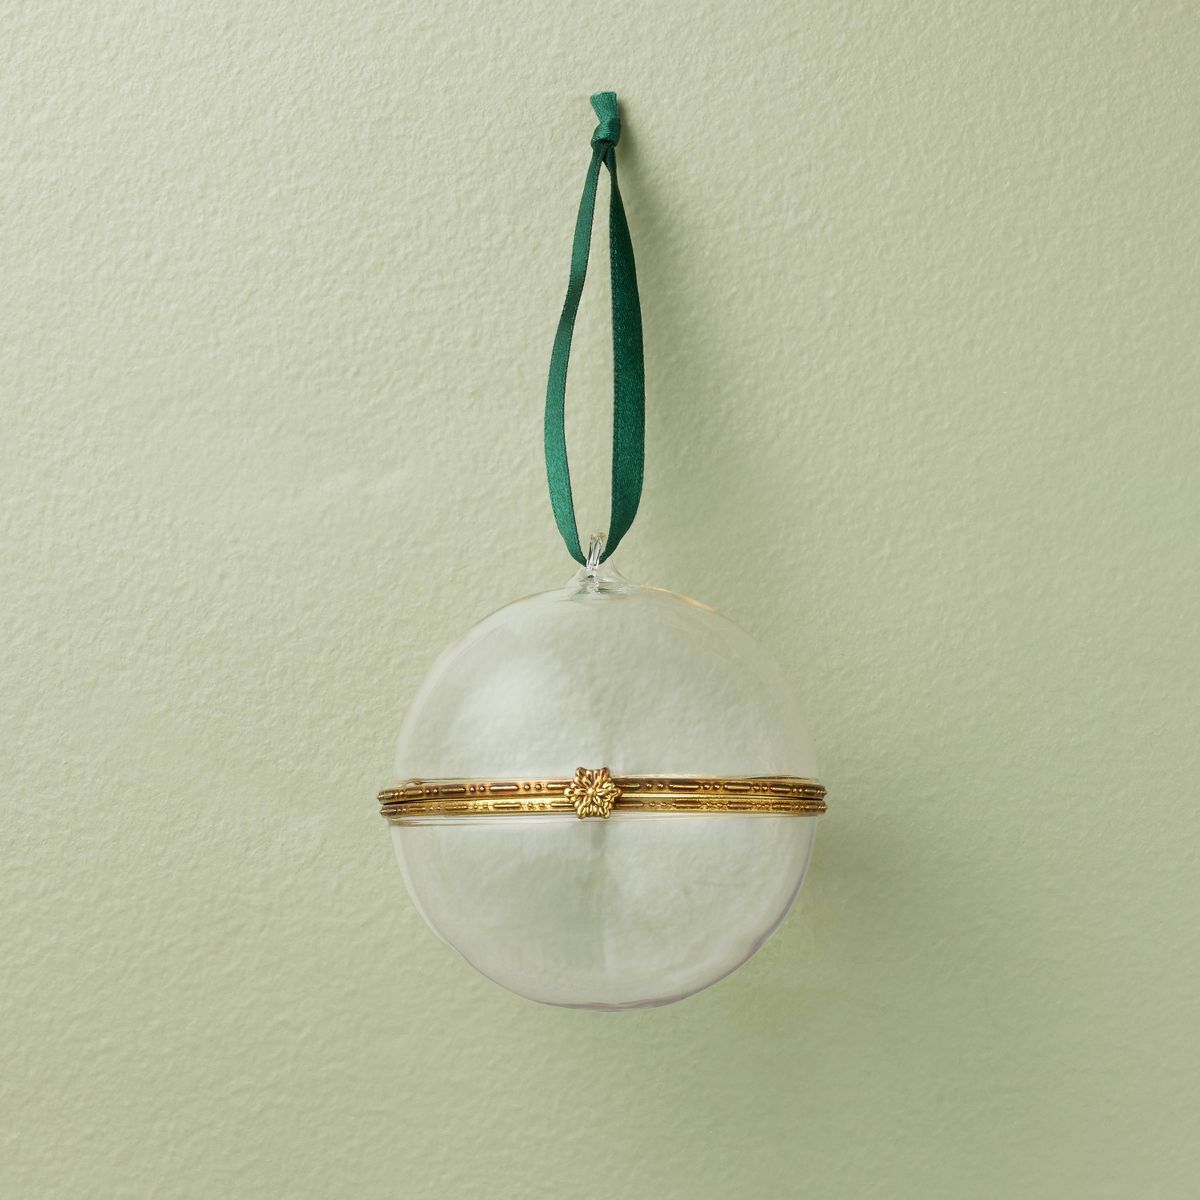 Hinged Glass Orb Christmas Tree Ornament - Hearth & Hand™ with Magnolia | Target